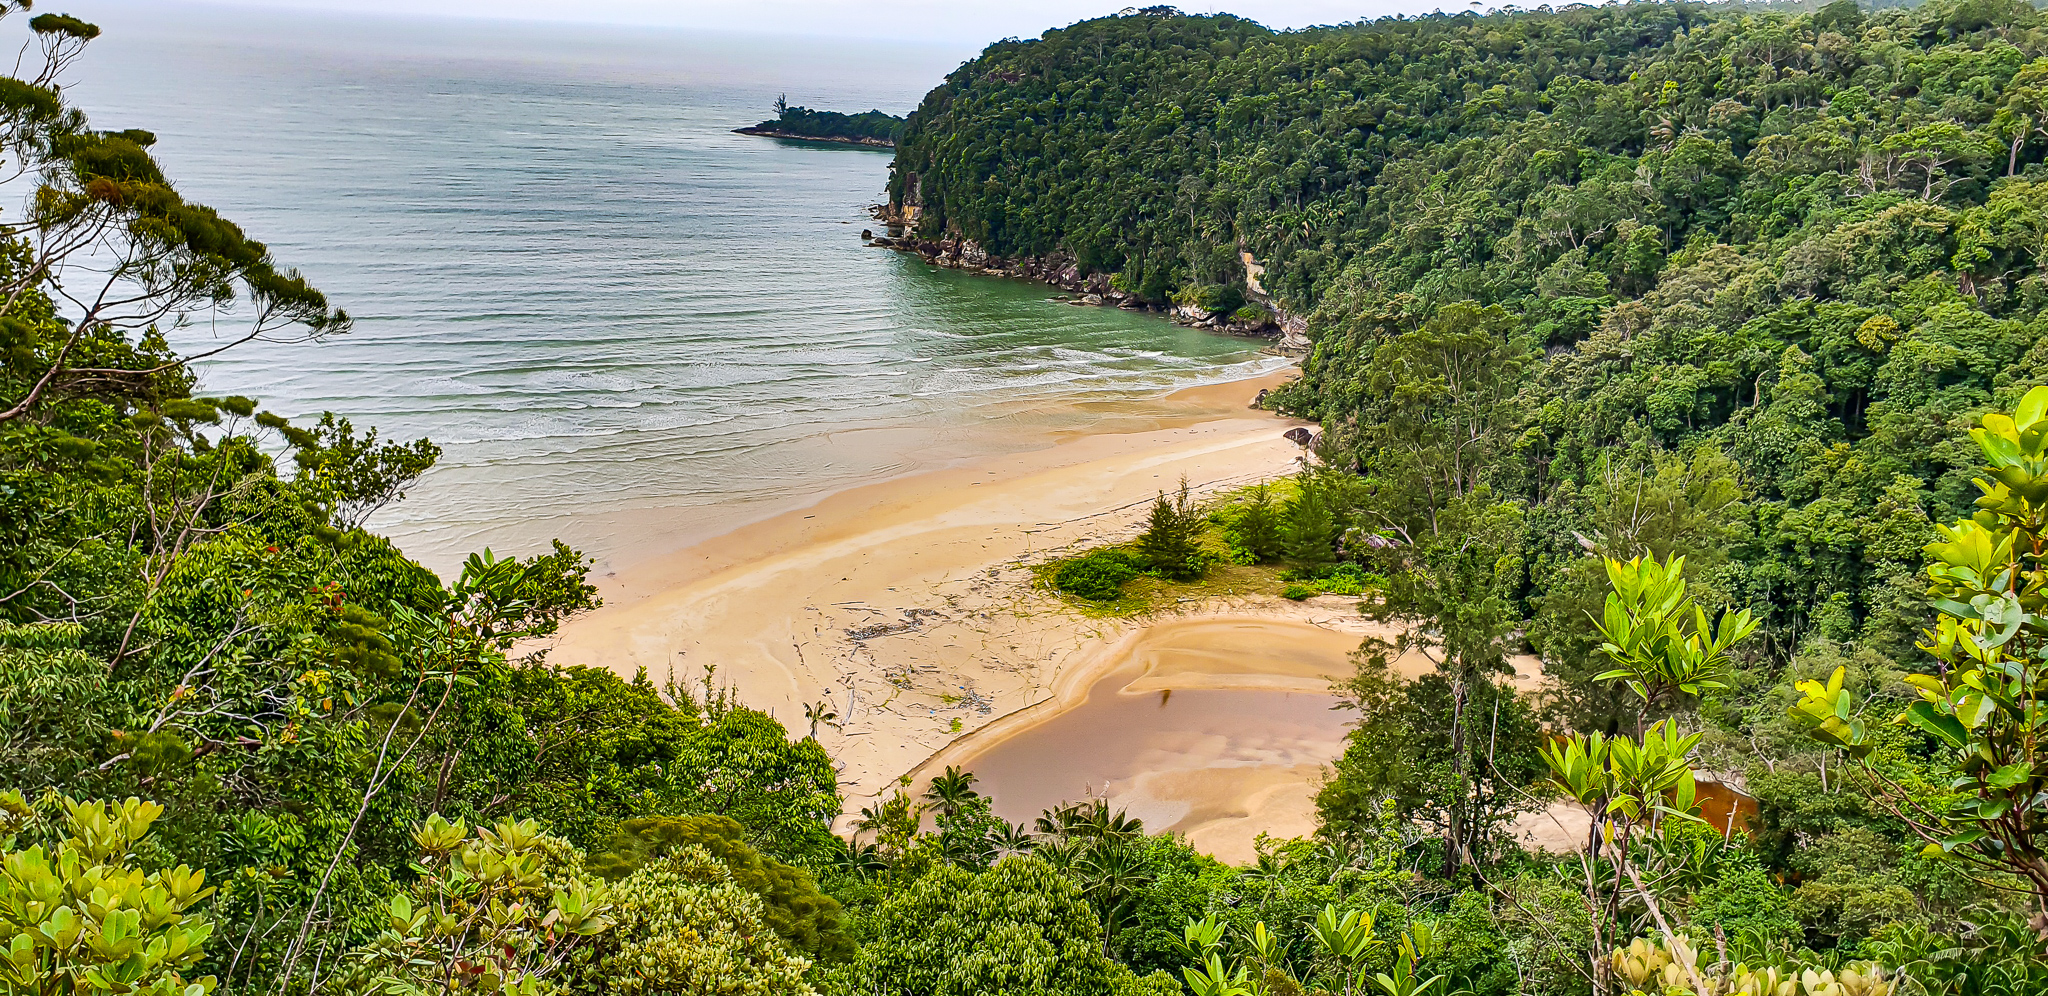 Read more about the article Tips when visiting Bako National Park in Sarawak